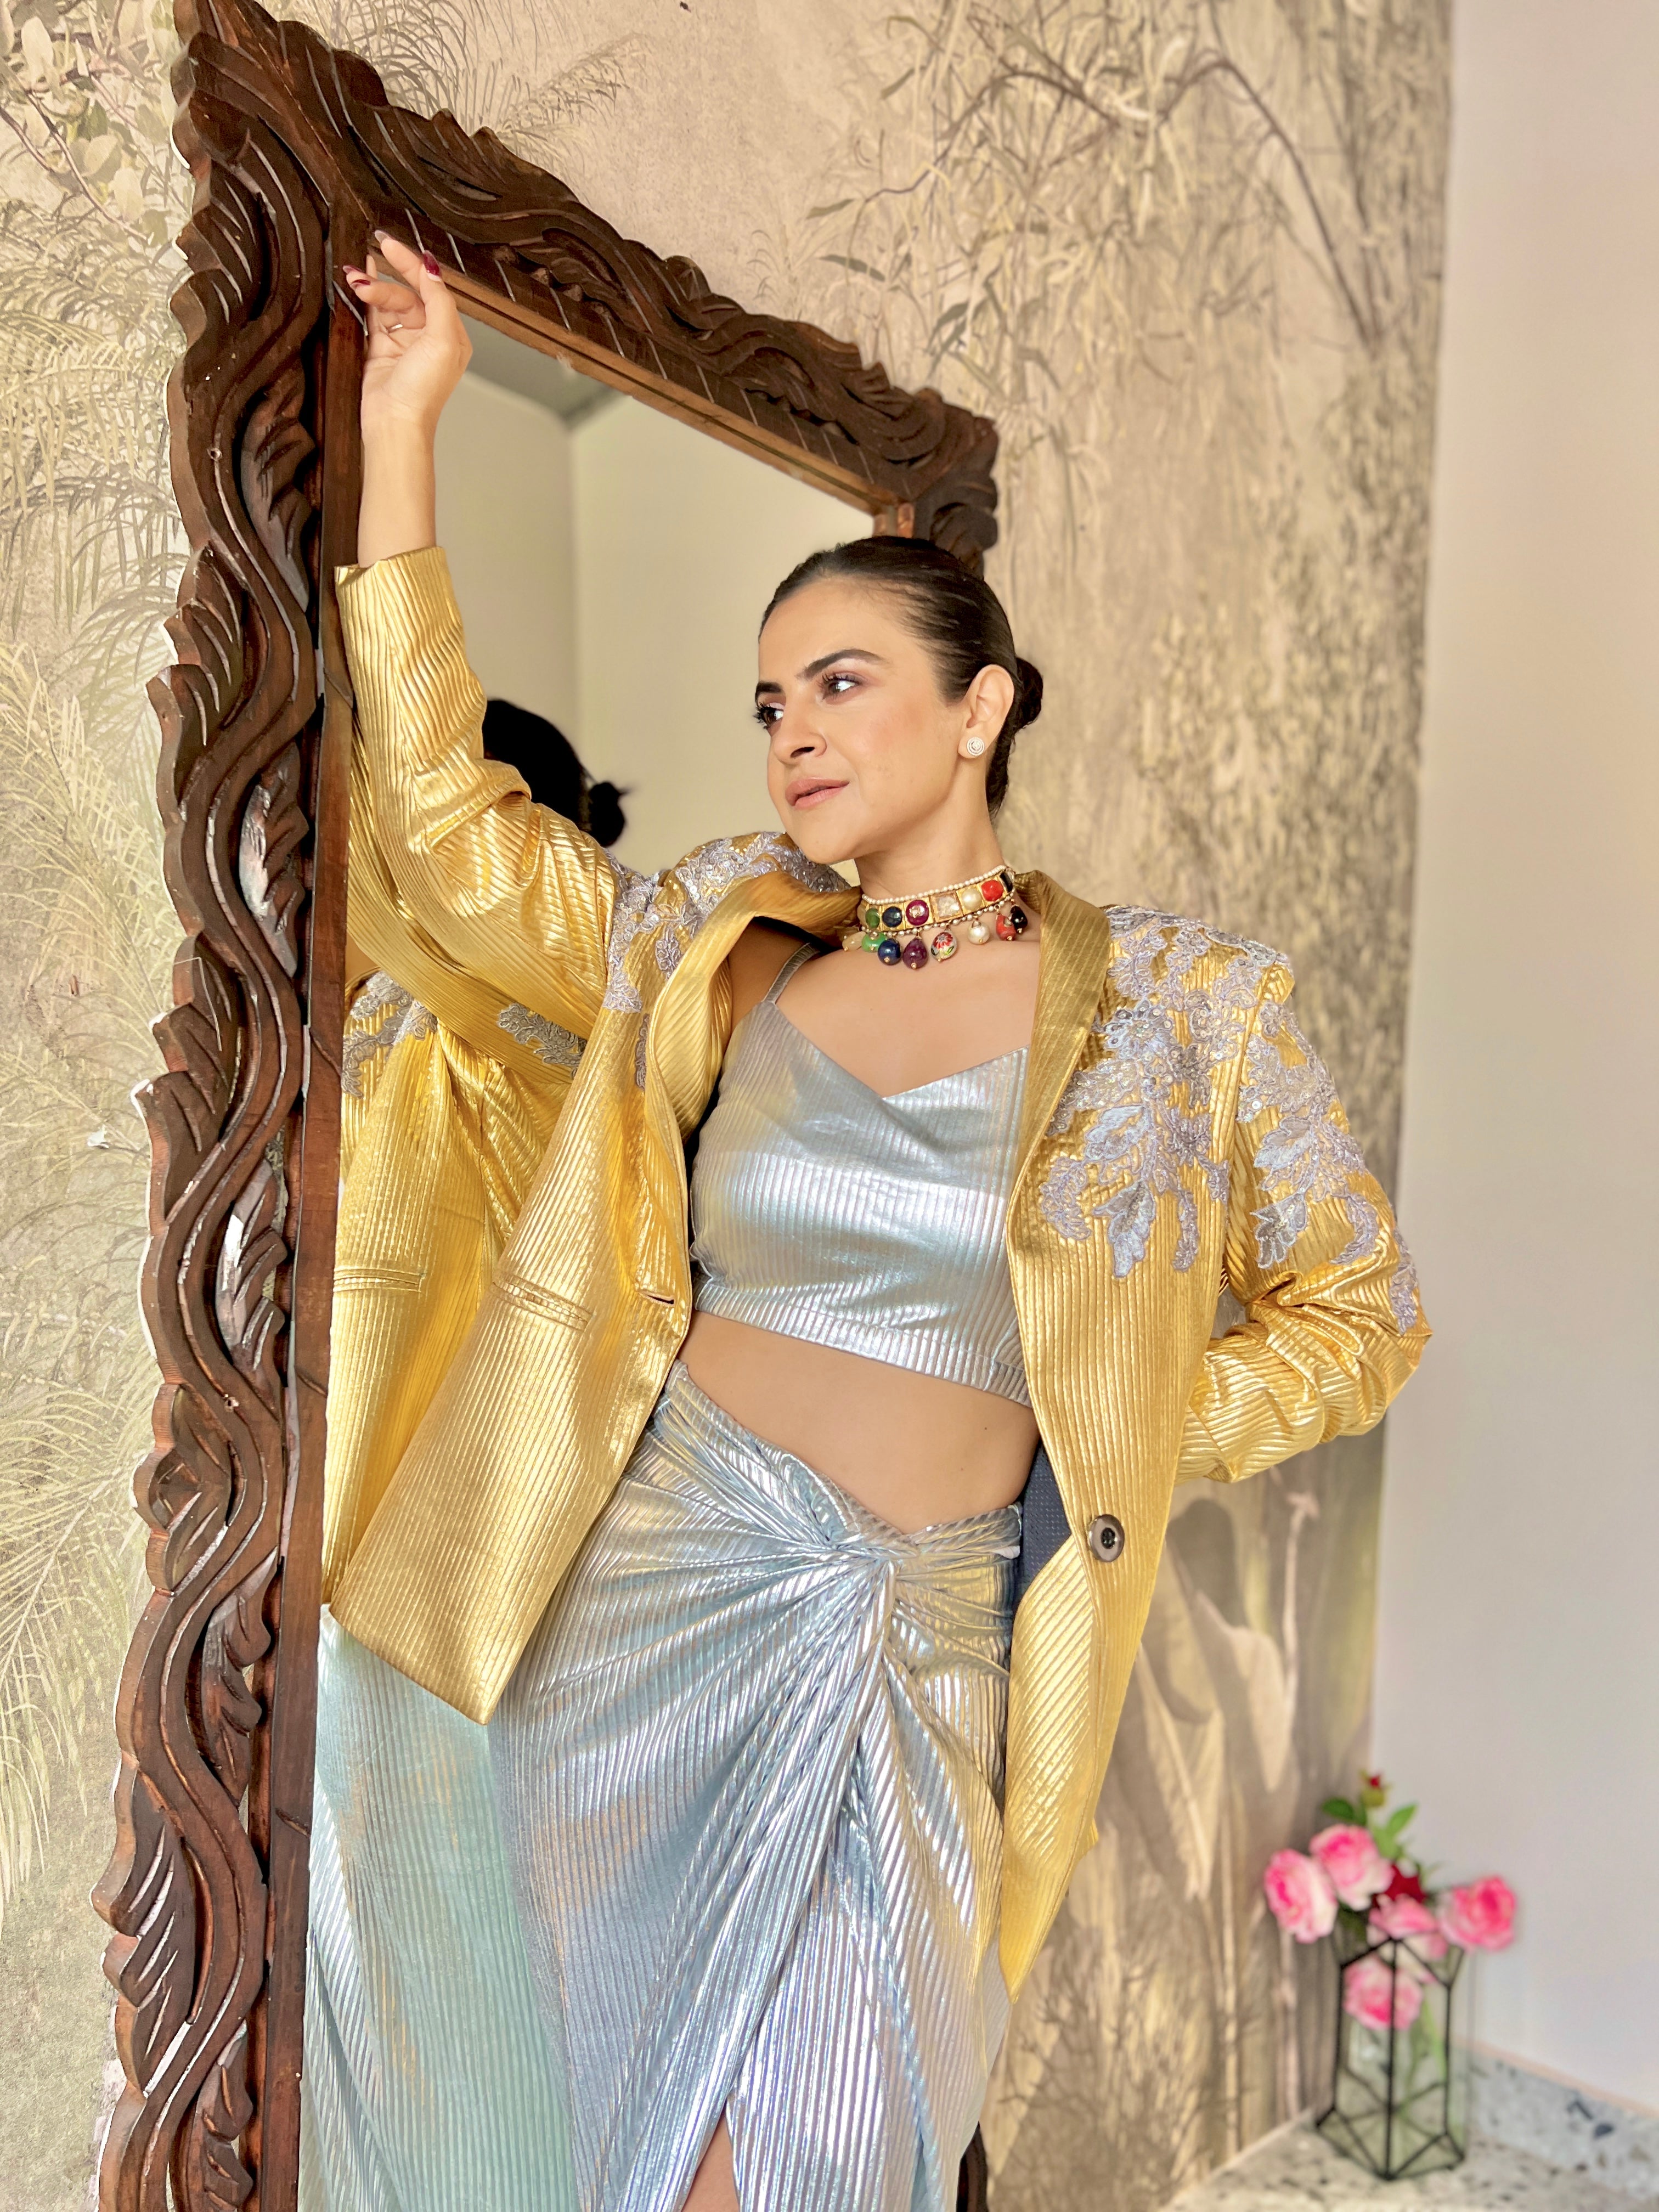 Power drape skirt suit in Gold and Silver